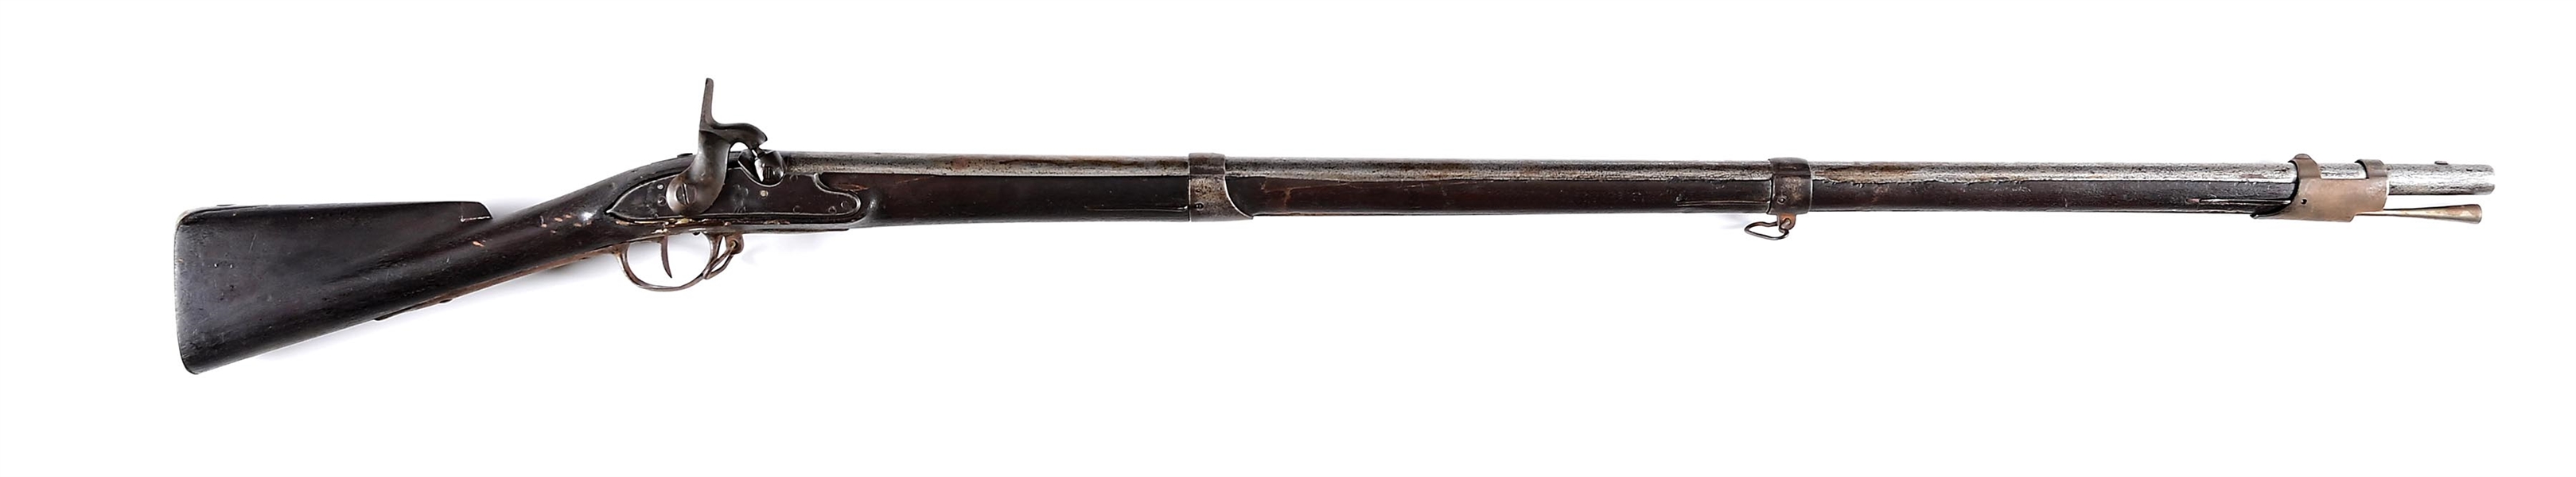 (A) SPRINGFIELD 1816 MUSKET CONVERTED TO PERCUSSION WITH CITY OF PHILADELPHIA MARKINGS.